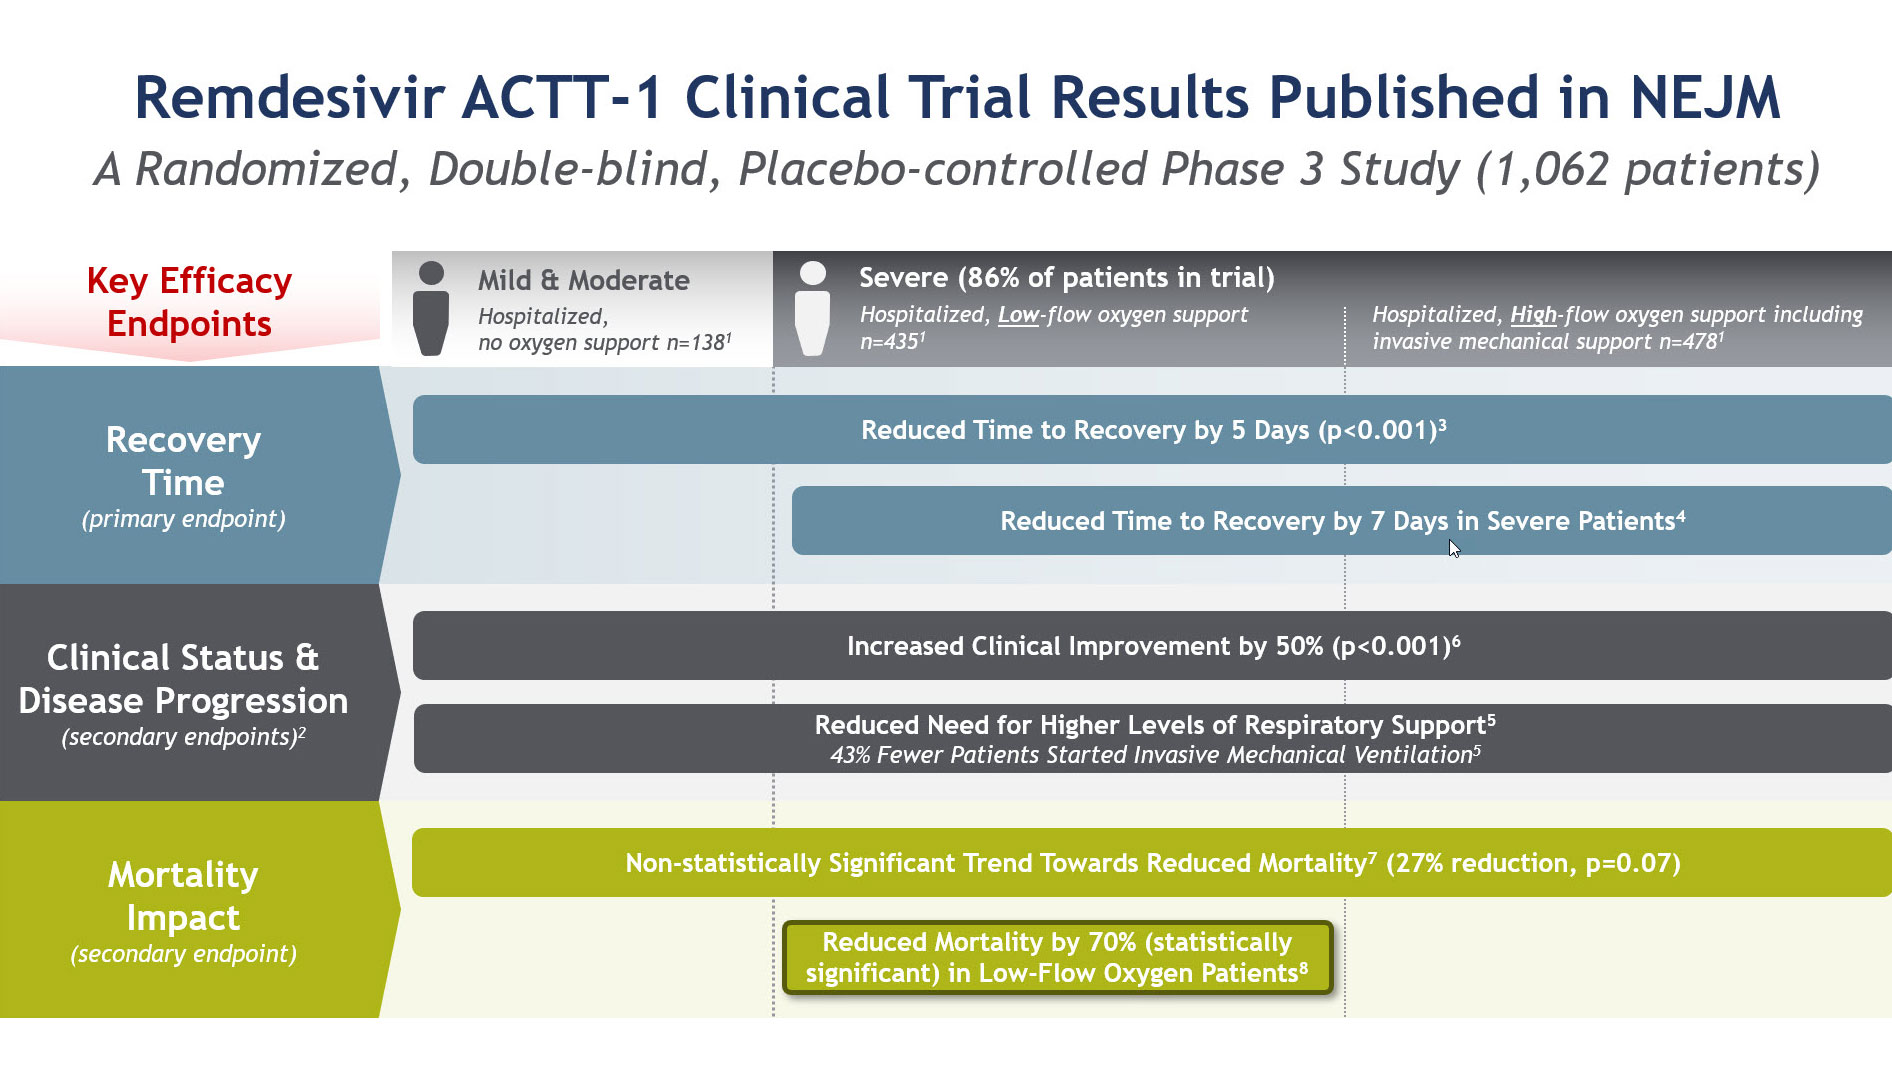 Results for the Remdesivir ACTT-1 clinical trails